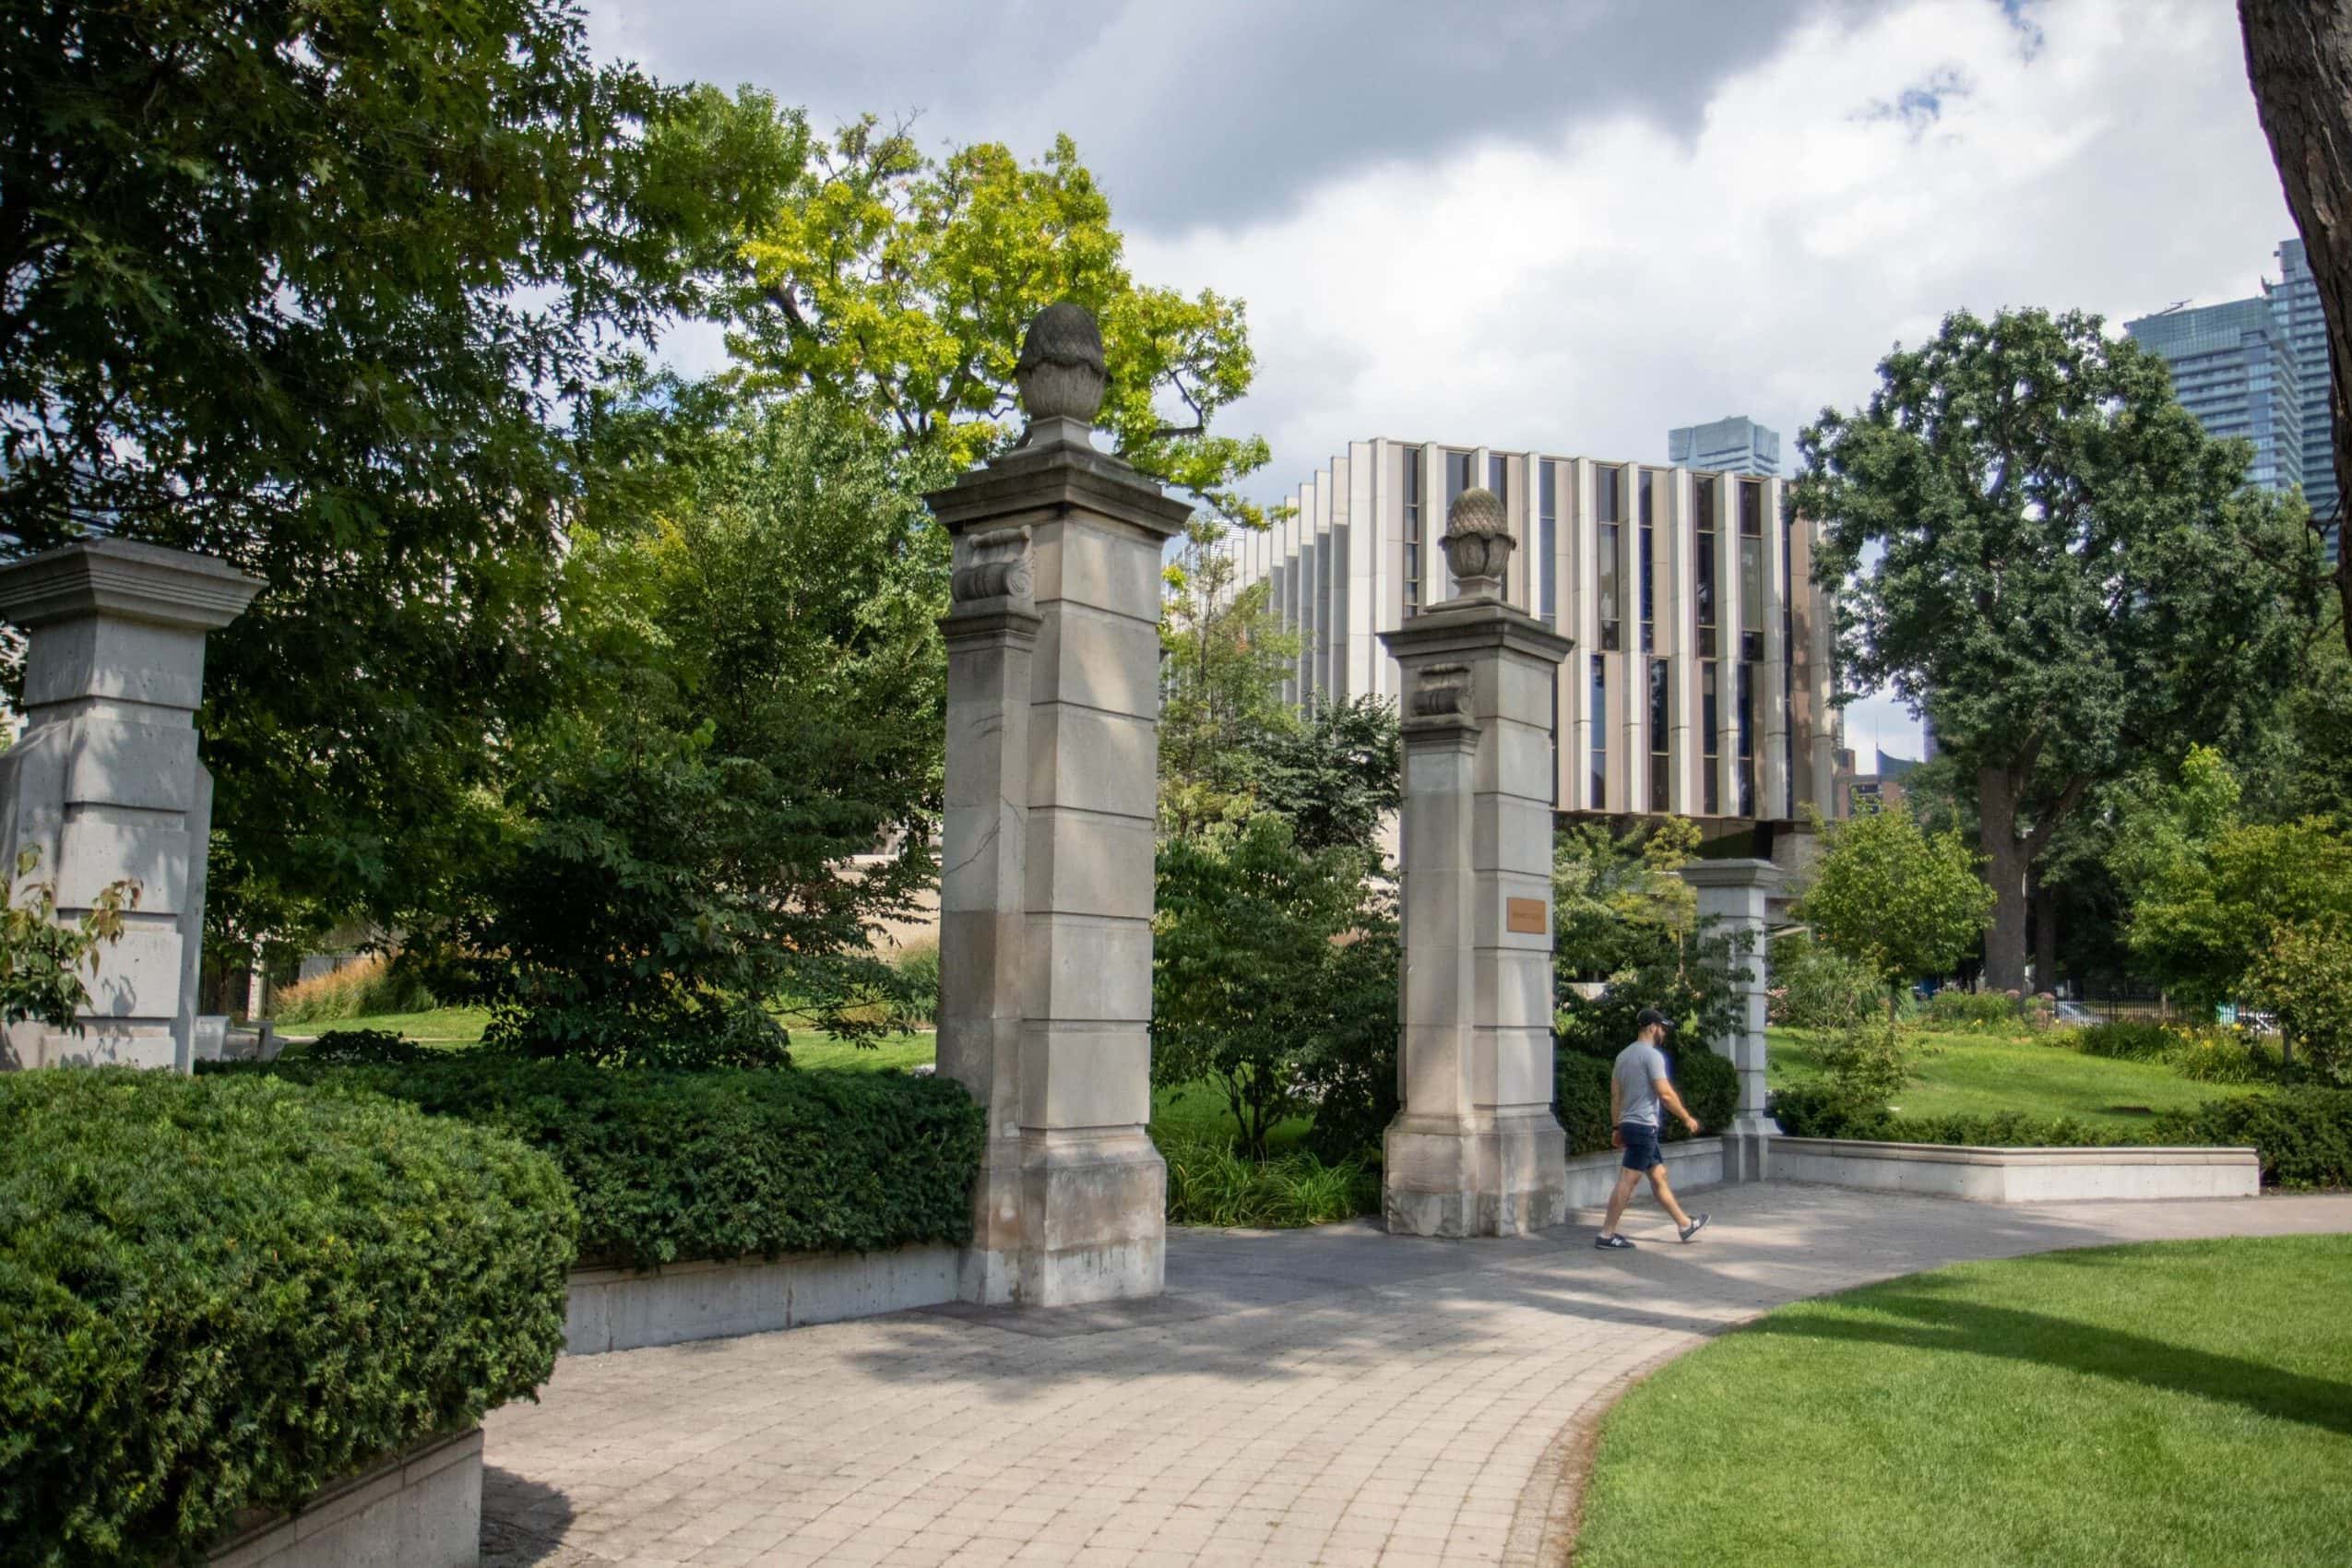 Stone pillars and bushes mark the entrance to the Philosopher's Walk pathway.